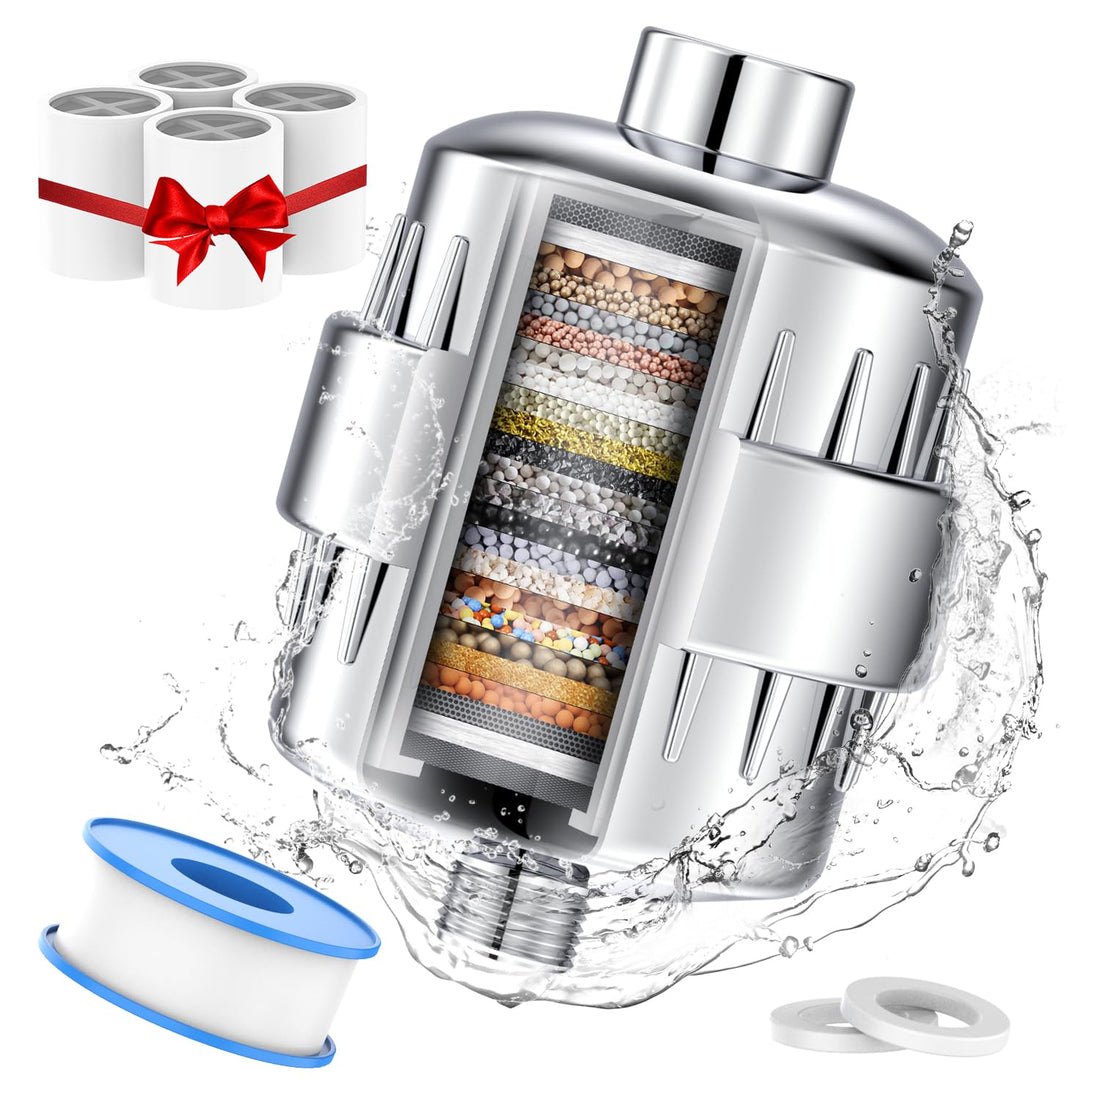 Shower Head Filter for Hard Water - 24 Stage Shower Filter Shower Water Filter with 4 Replaceable Filter Cartridges Protects Your Skin and Hair from Chlorine and Heavy Metals in Water, Chrome